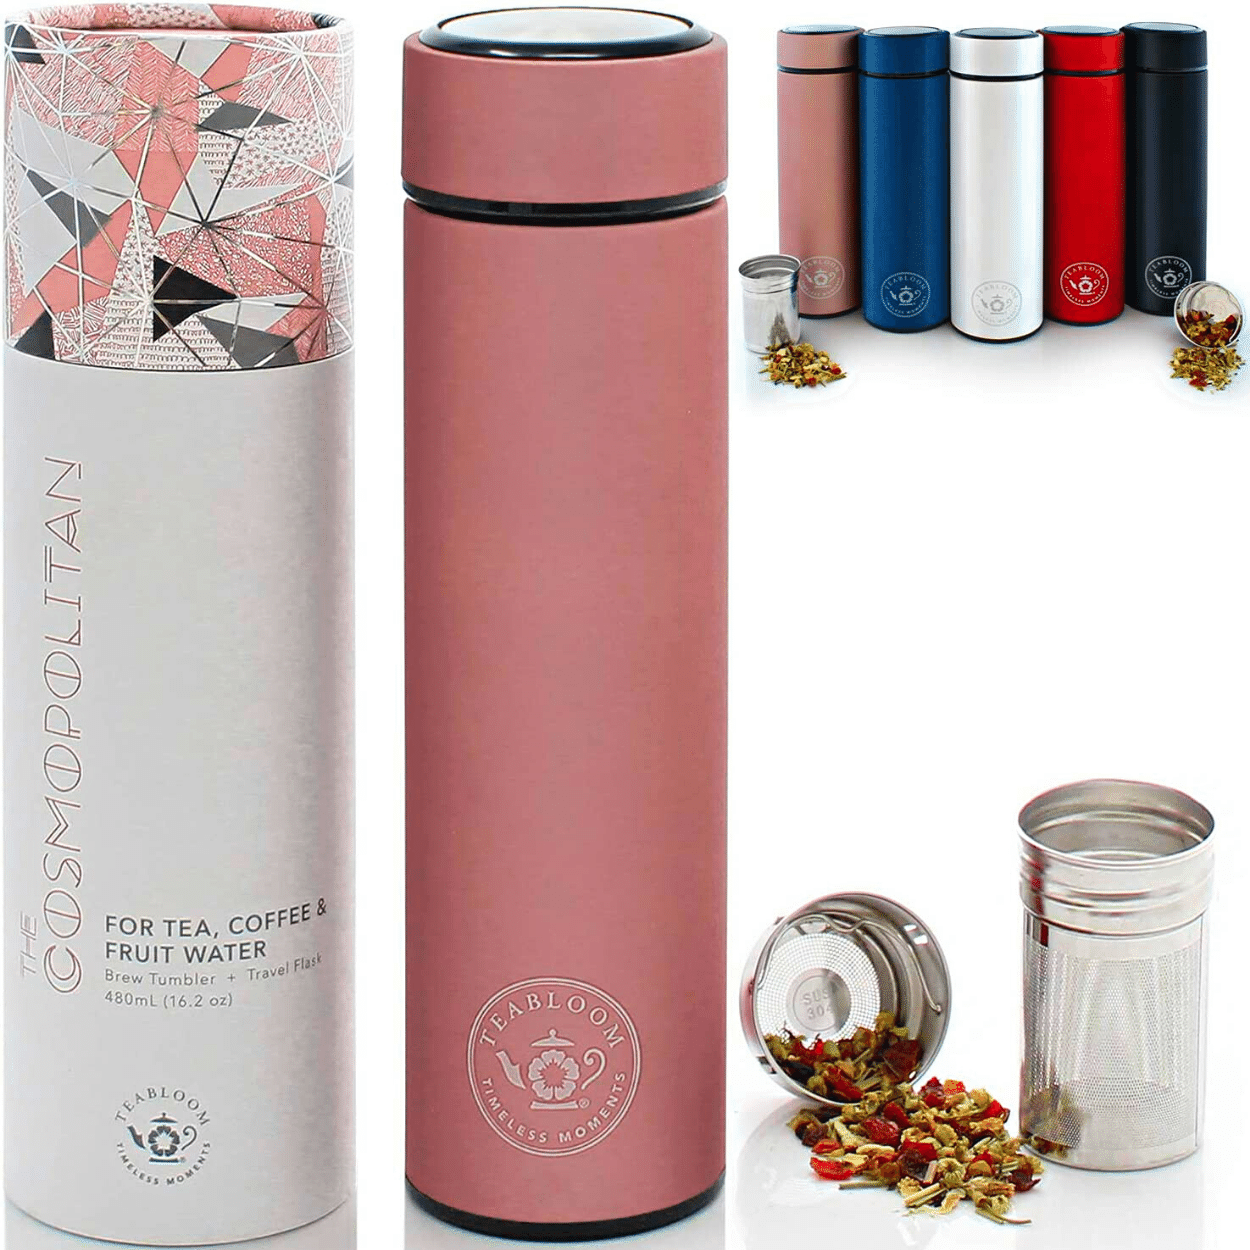 MIRA Stainless Steel Insulated Tea Infuser Bottle for Loose Tea - Thermos  Travel Mug with Removable Tea Infuser Strainer - Black - 18 oz